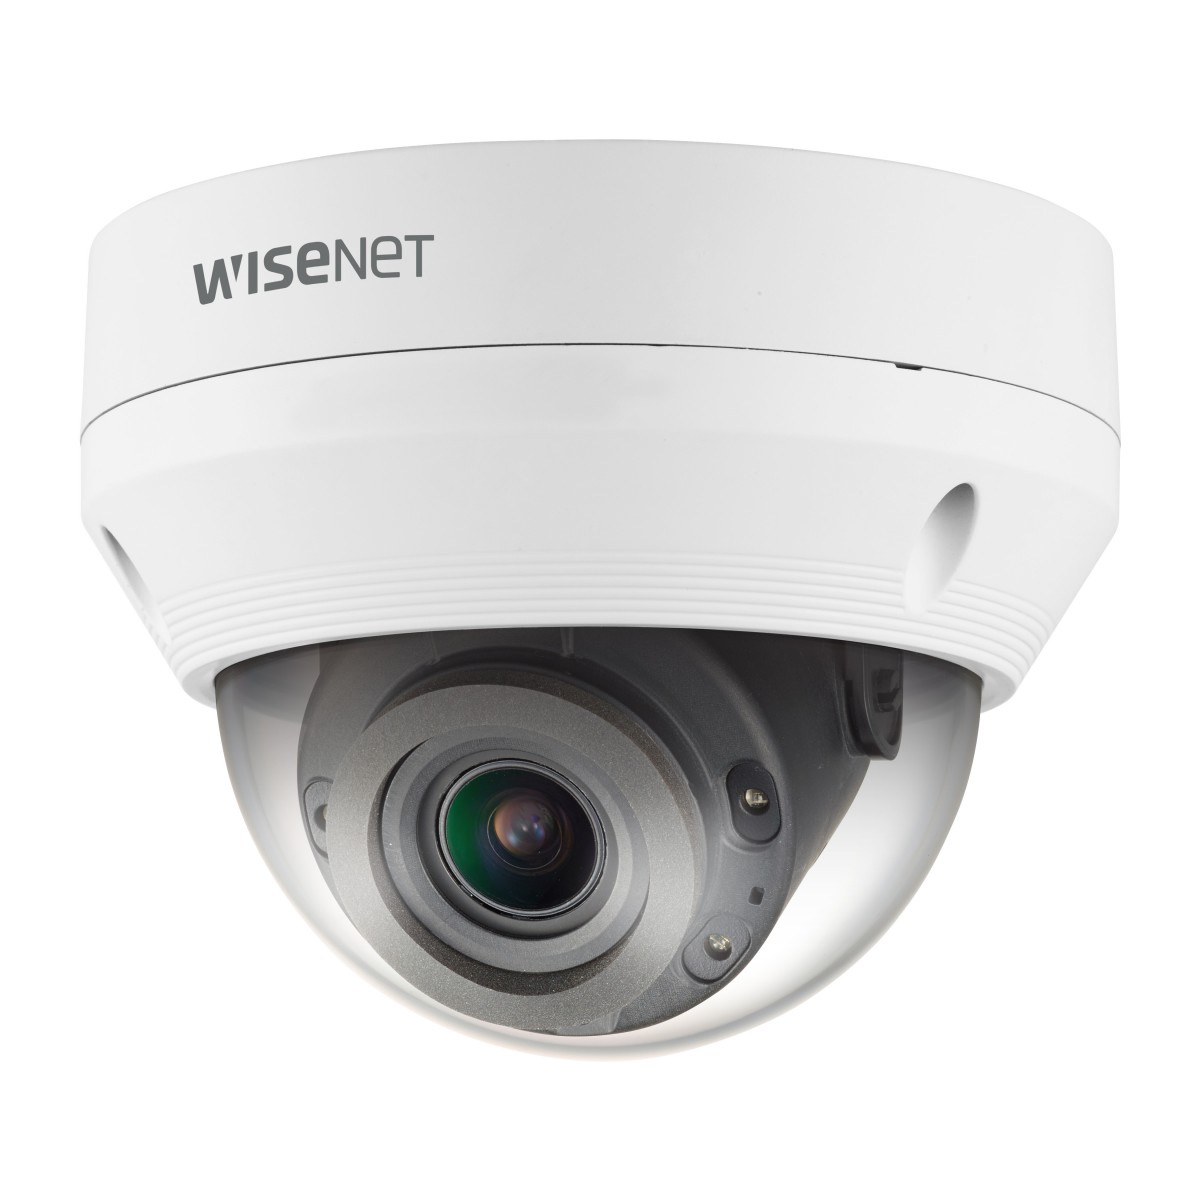 Hanwha Techwin Hanwha QNV-6082R - IP security camera - Outdoor - Wired - Simplified Chinese - Traditional Chinese - Czech - Germ